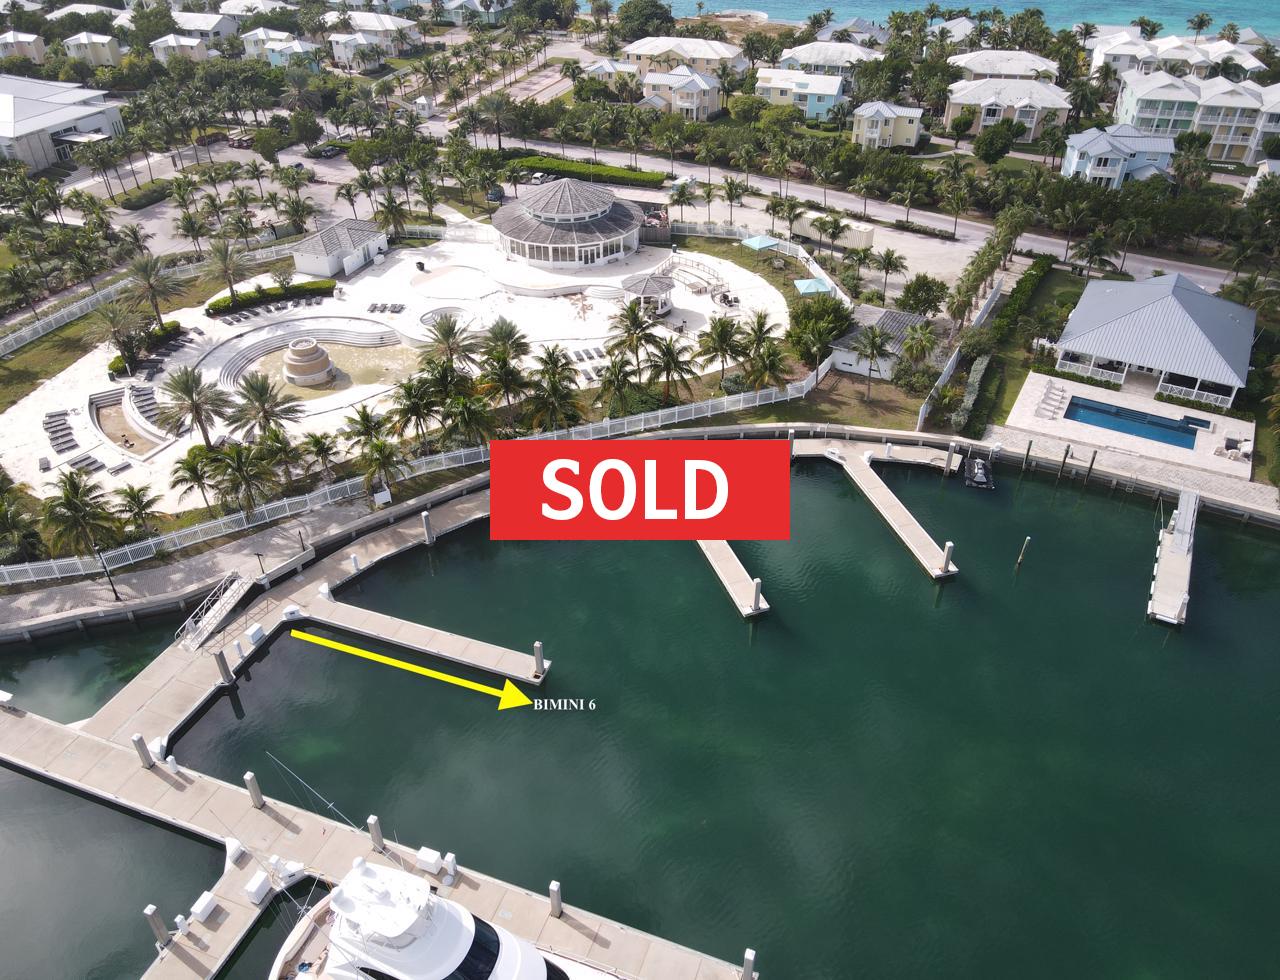 /listing-sold-bimini-bay-dock-slip-for-sale-39757.html from Coldwell Banker Bahamas Real Estate